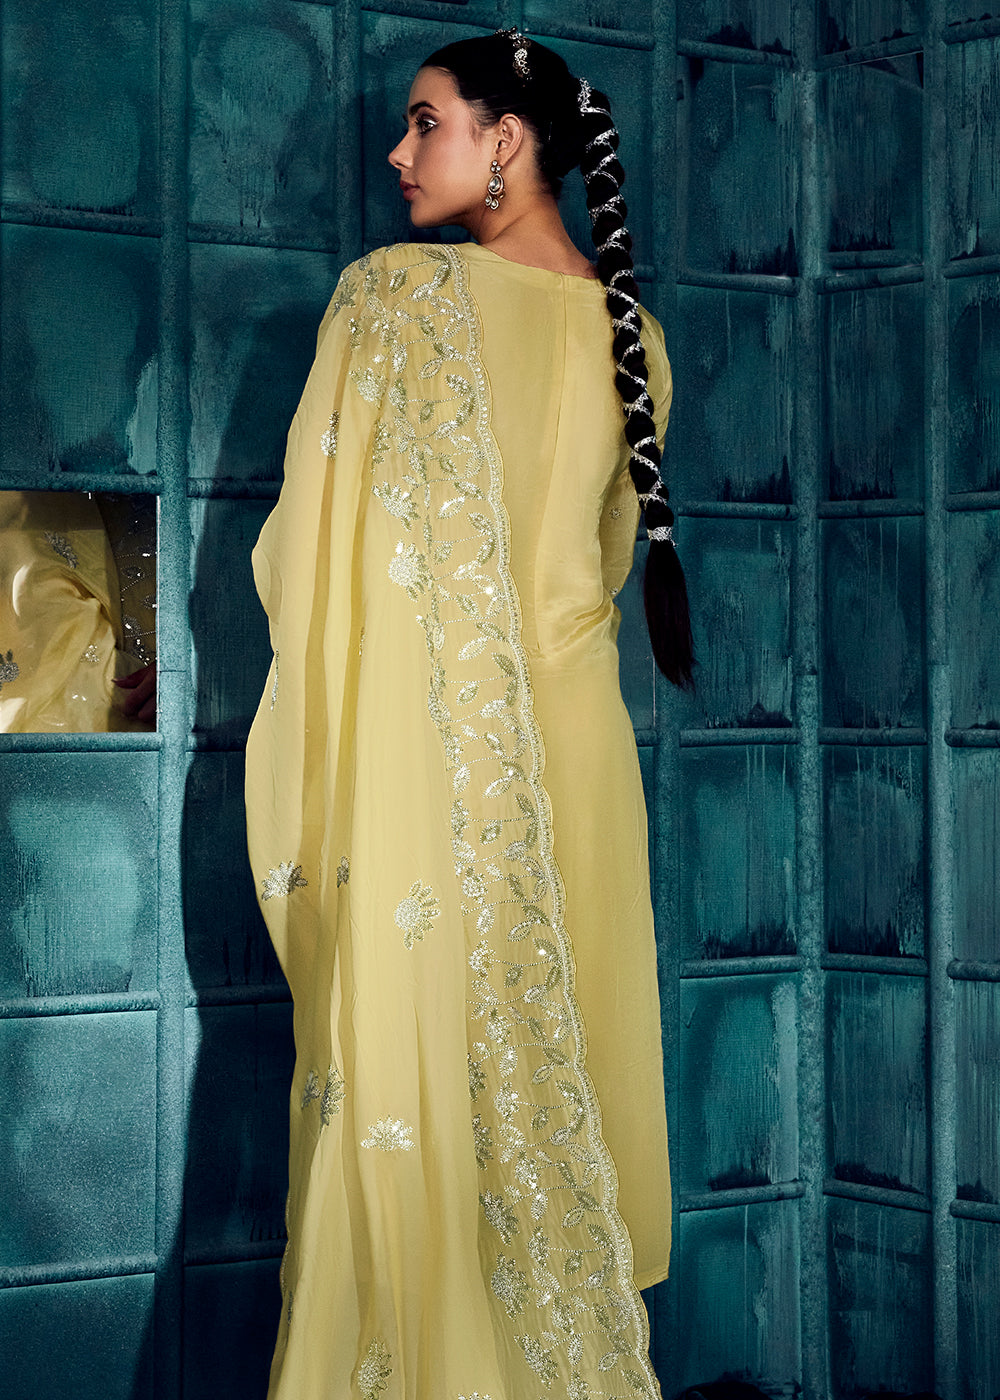 Buy Now Pastel Yellow Modale Silk Embroidered Festive Salwar Suit Online in USA, UK, Canada, Germany, Australia & Worldwide at Empress Clothing.